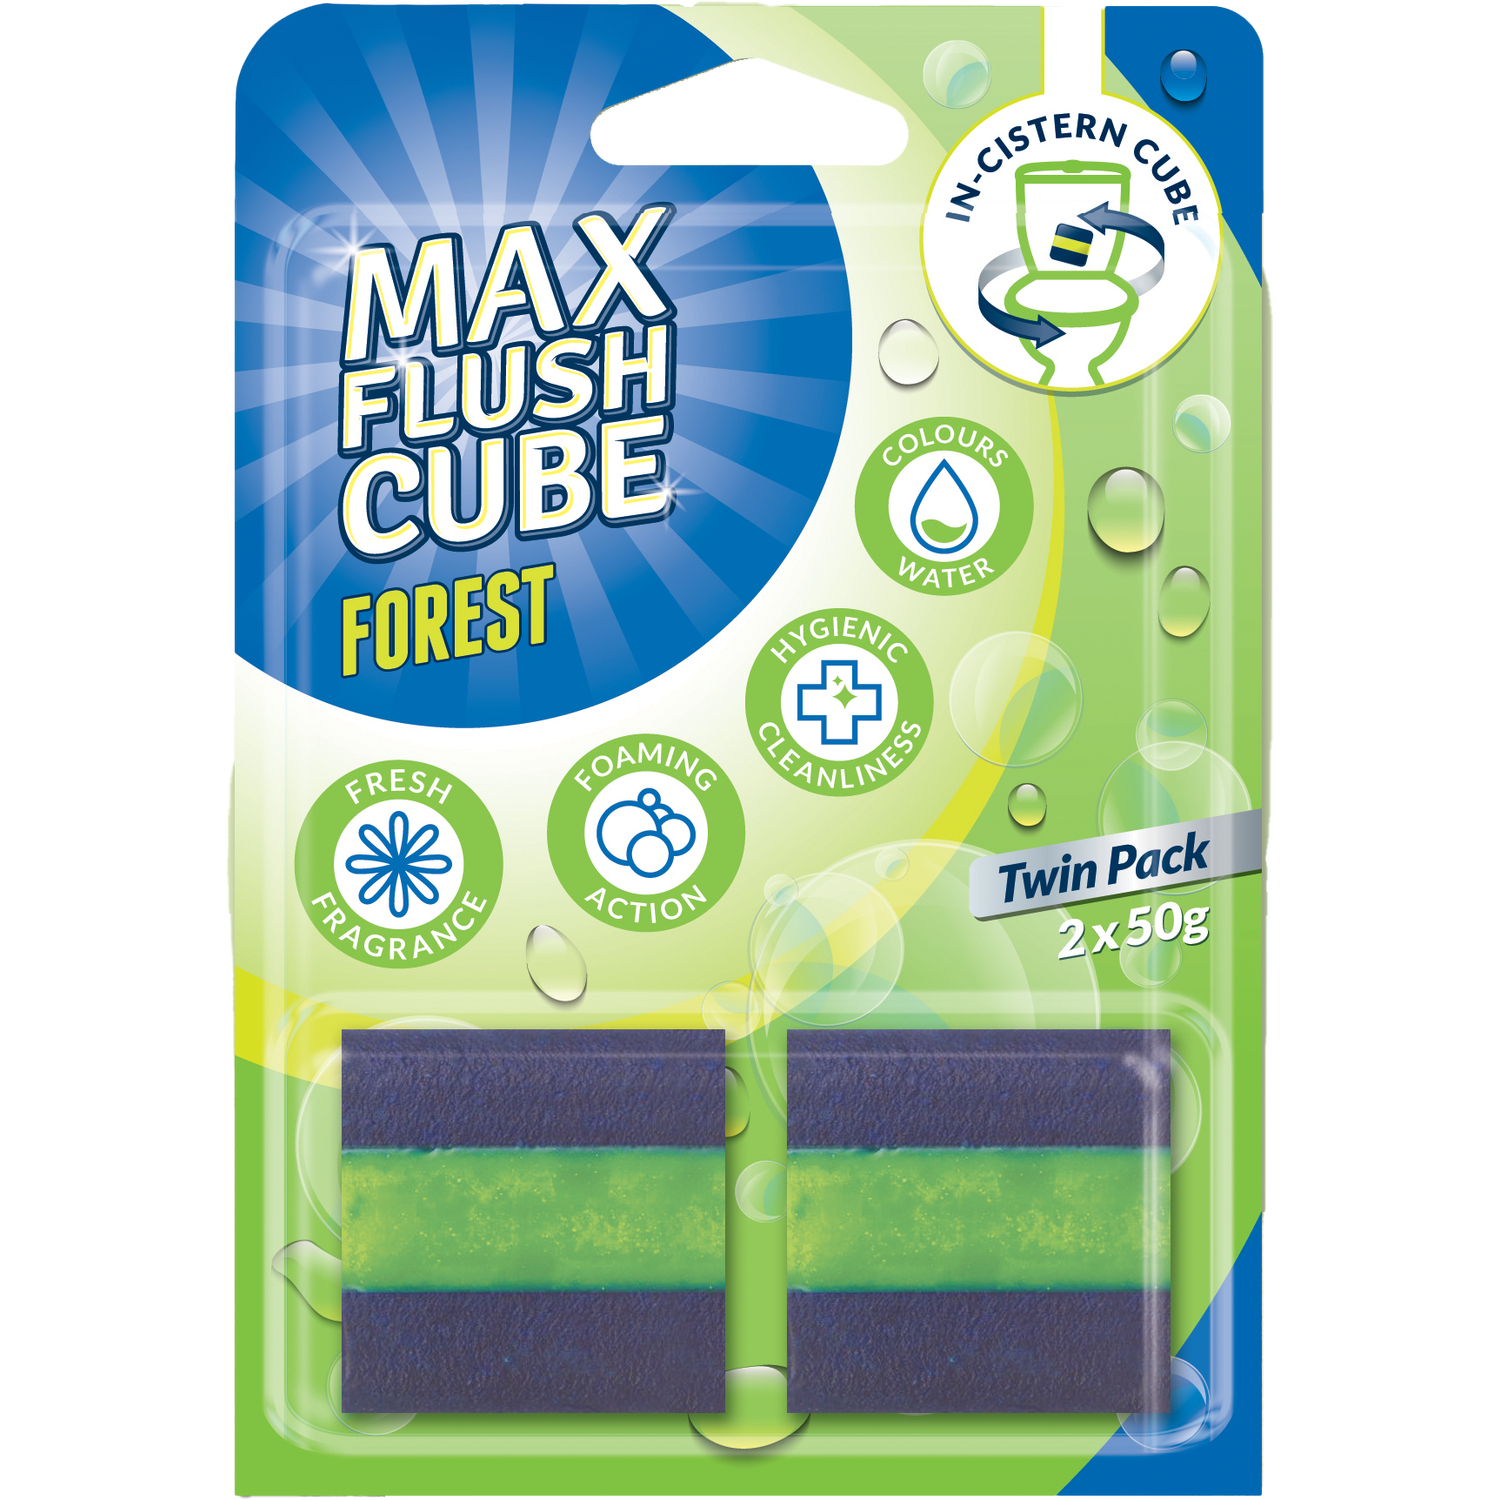 Max Flush Cube Twin Pack - Forest Image 2